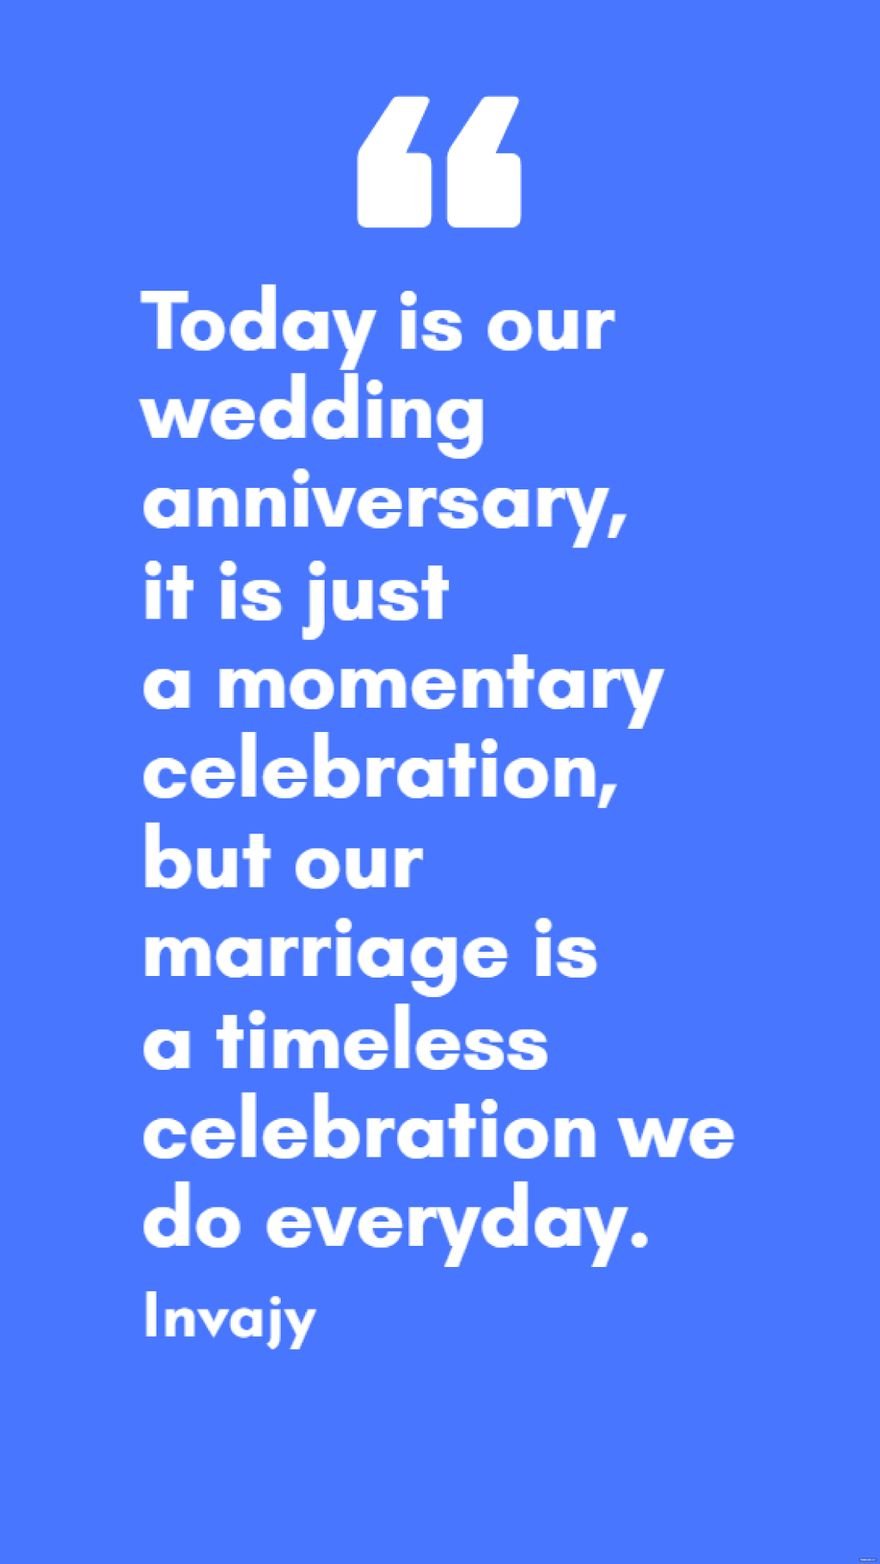 Invajy - Today is our wedding anniversary, it is just a momentary celebration, but our marriage is a timeless celebration we do everyday. in JPG